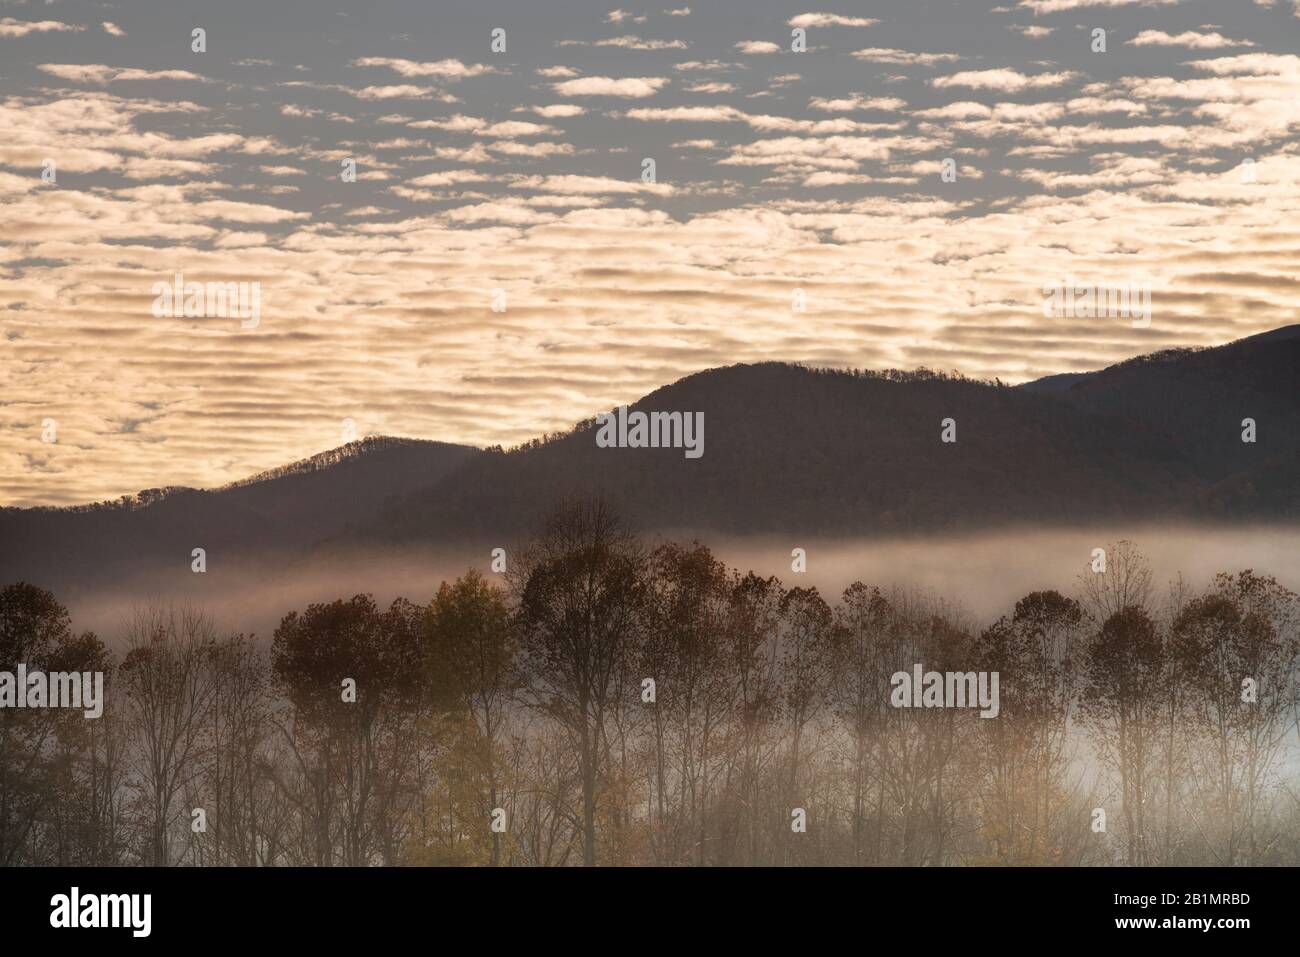 Sunrise in Cade’s Cove, Great Smoky Mountains National Park, Tennessee Stock Photo